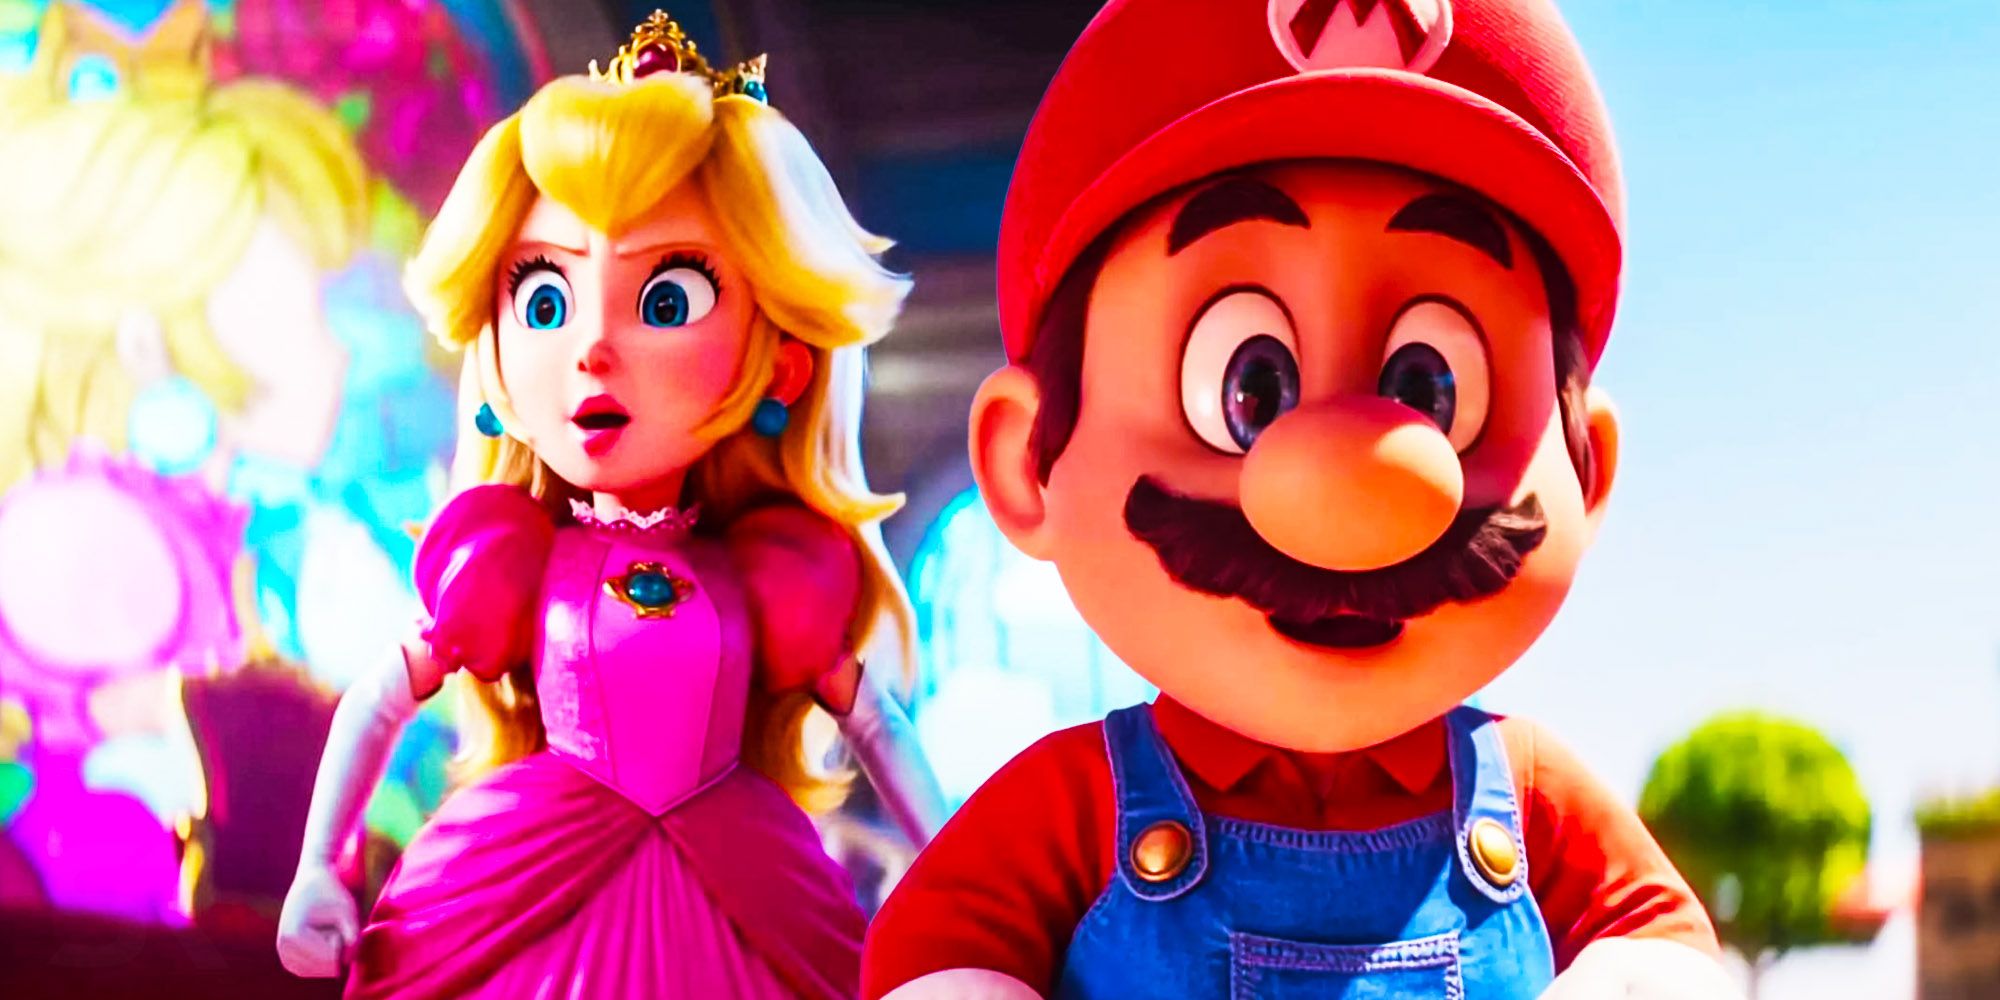 Where Princess Peach Is Really From (Is She From Mario’s World?)